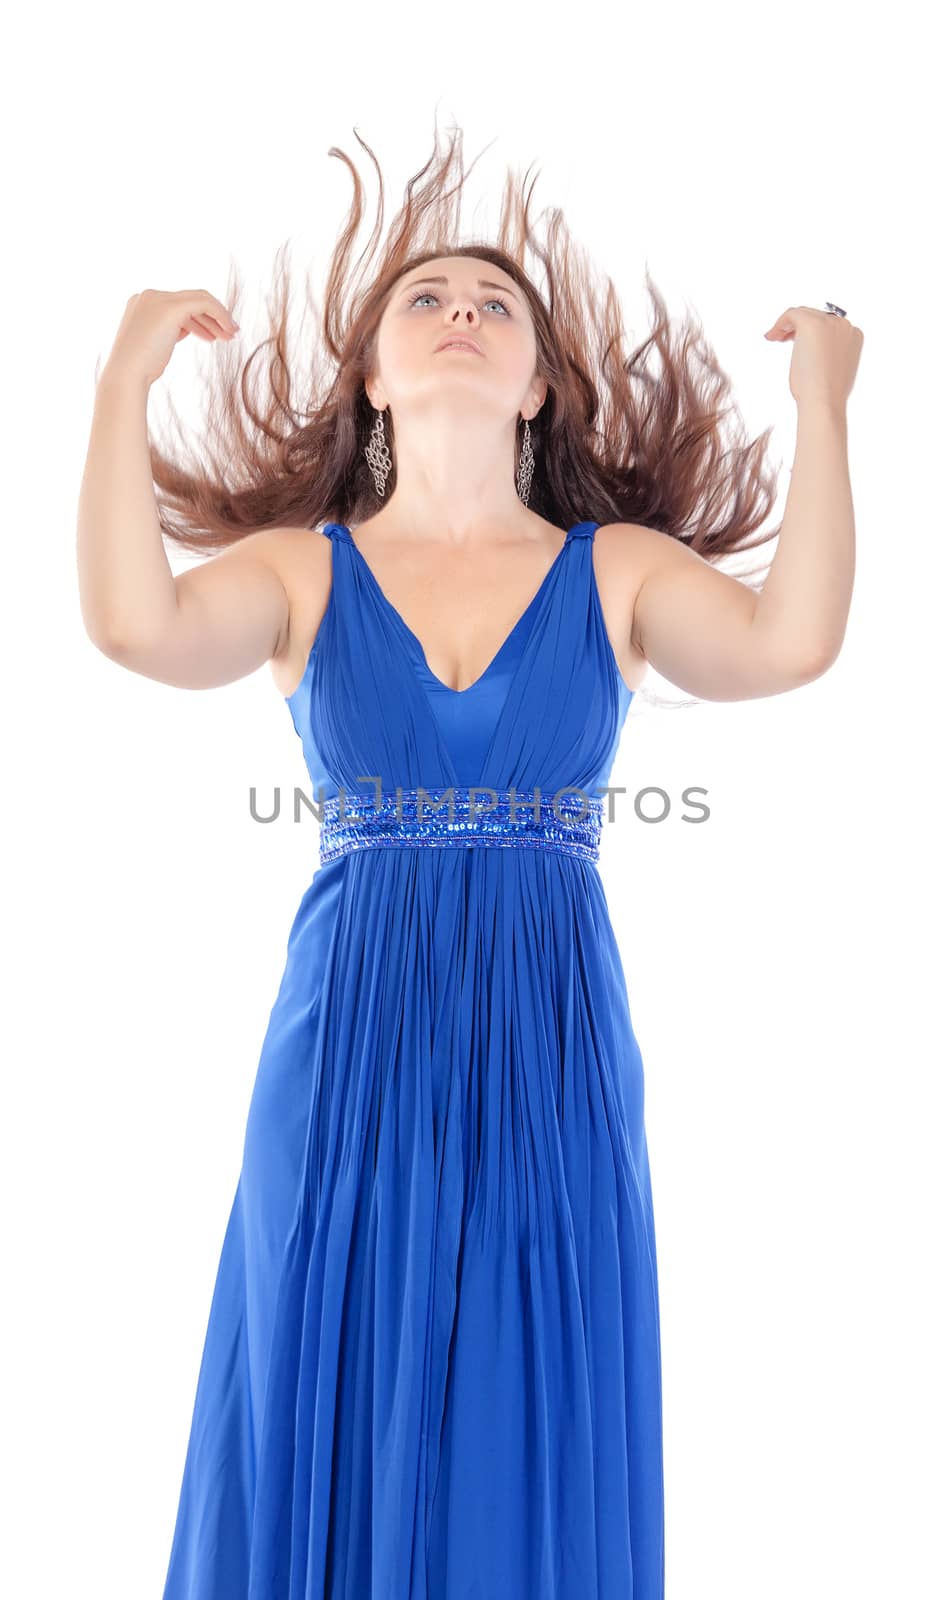 Portrait of a beautiful young woman in blue dress with streaming hair on white background